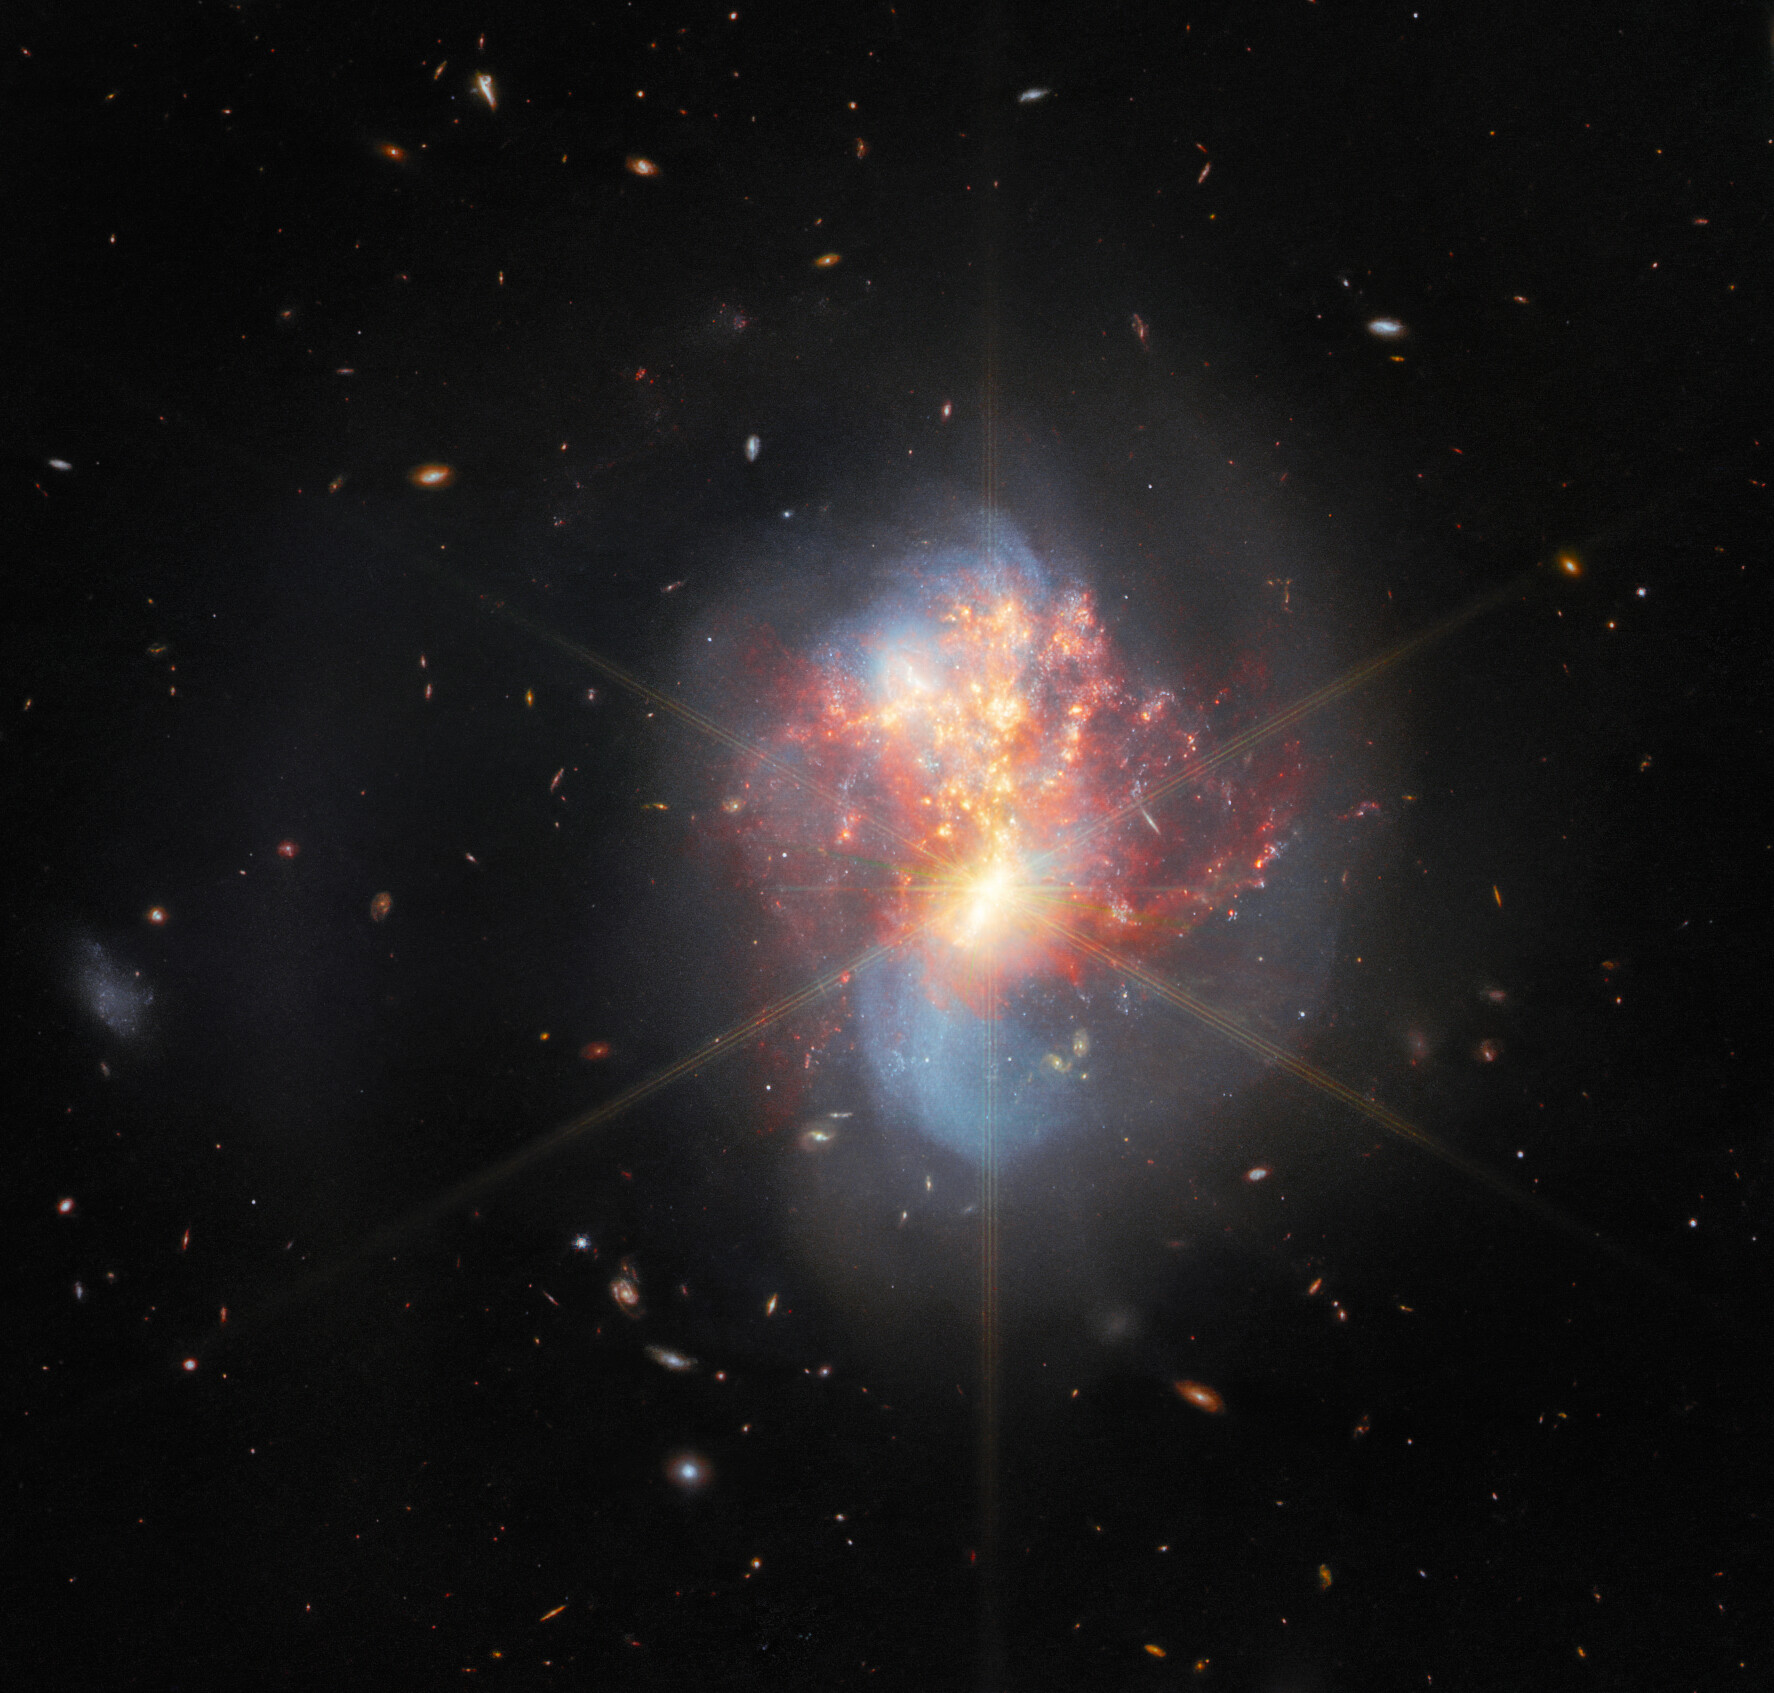 Webb and Hubble Peer Into the Wreckage of a Galactic Collision